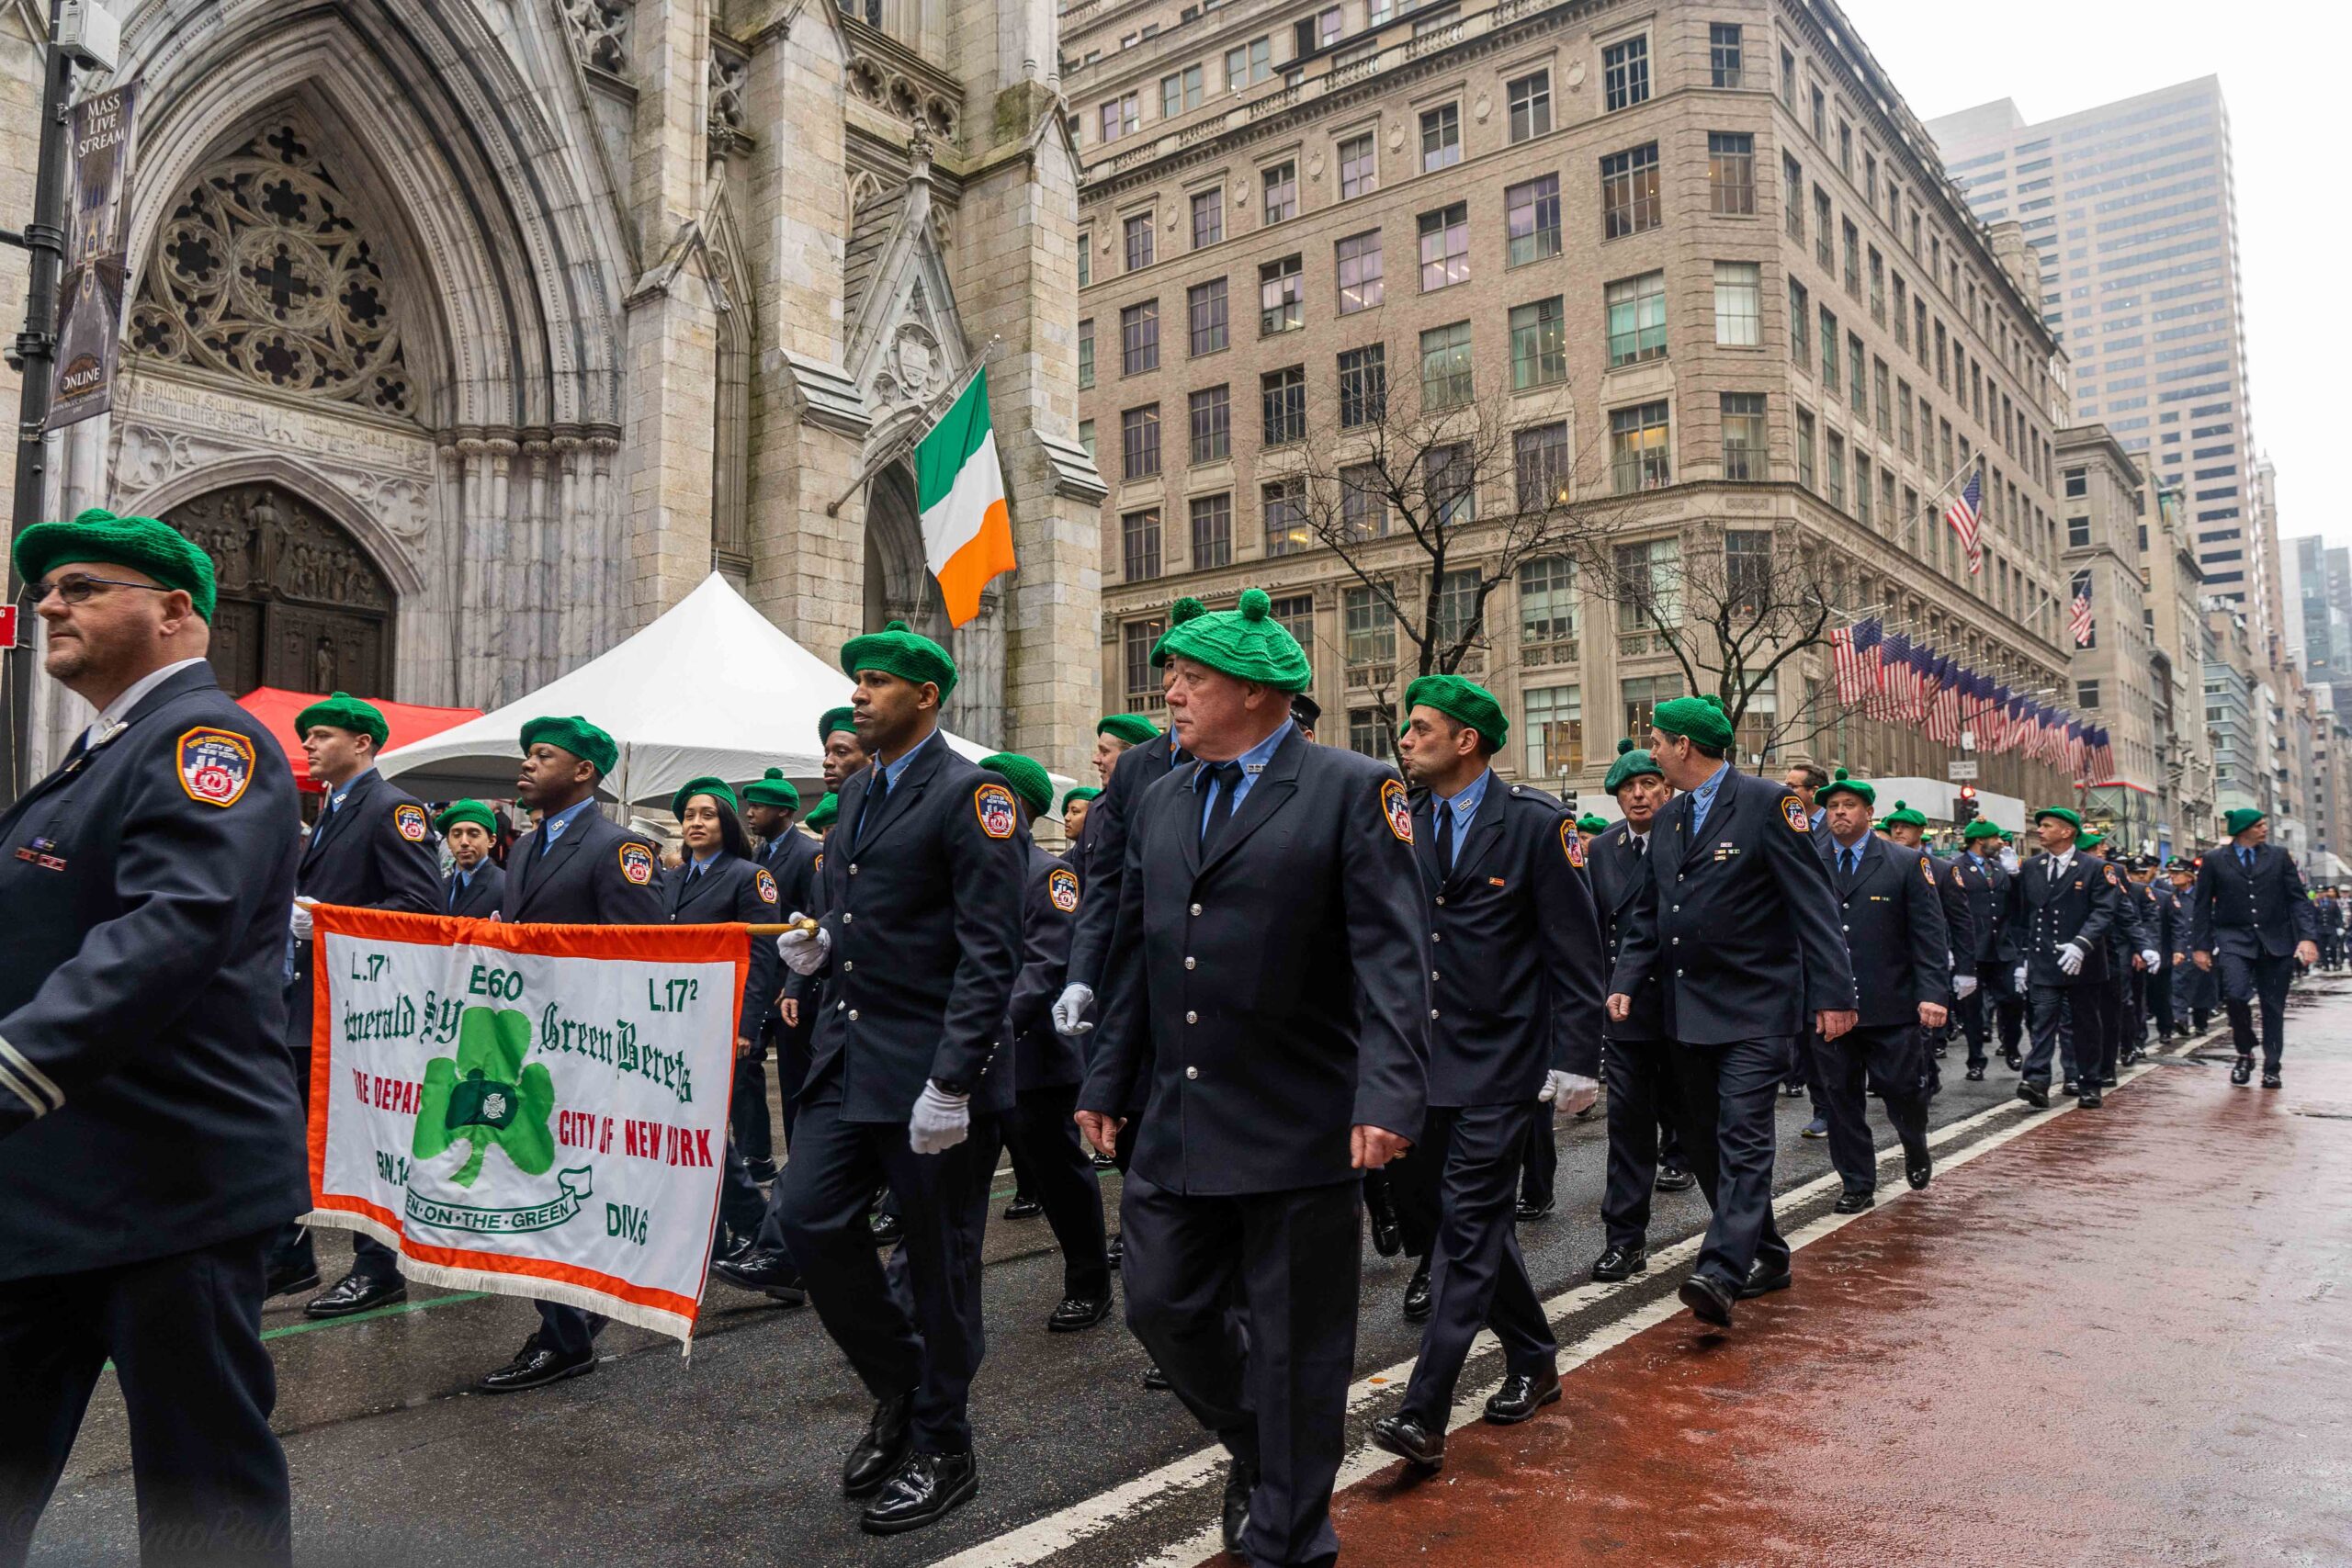 FDNY members marching in the New York City St. Patrick's Day Parade along Fifth Avenue in Manhattan. (Photo: FDNY)